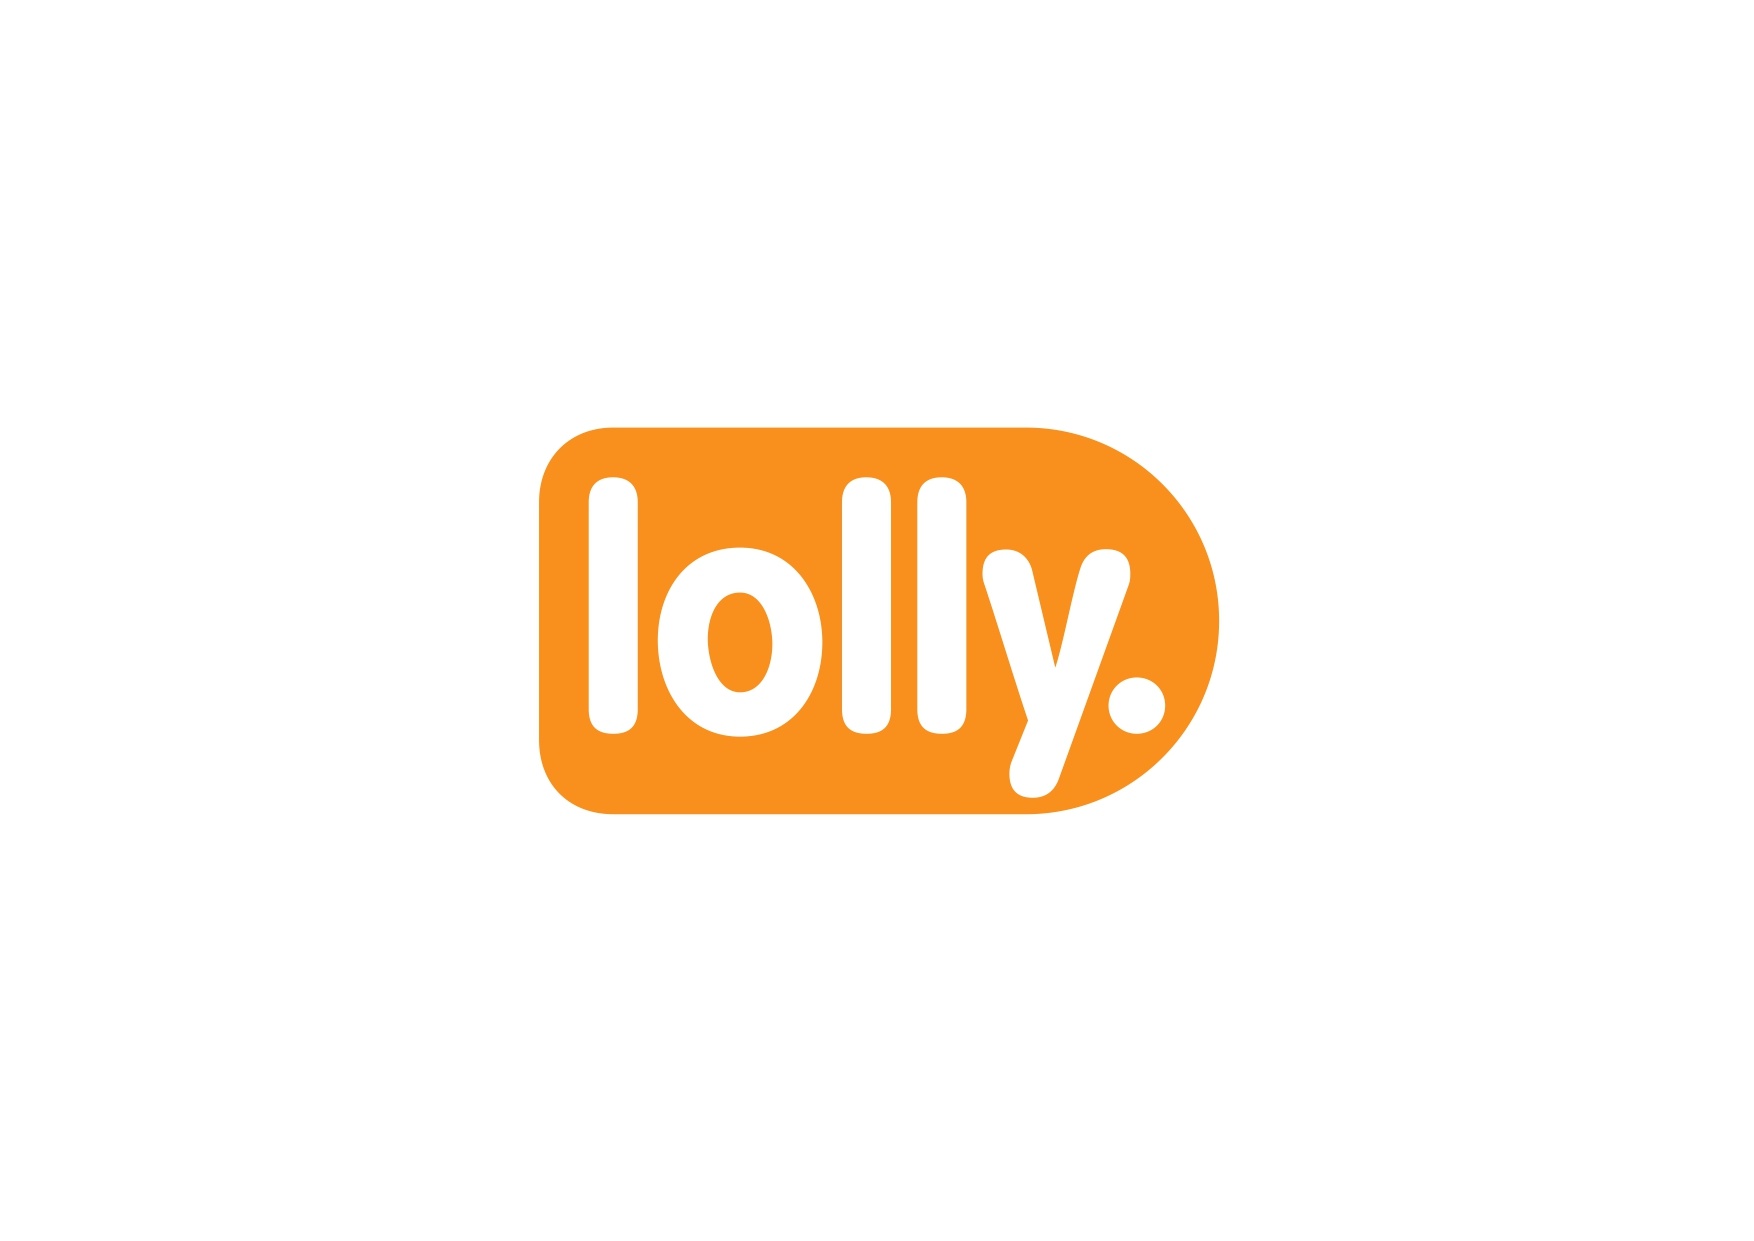 Peter Moore Lolly logo